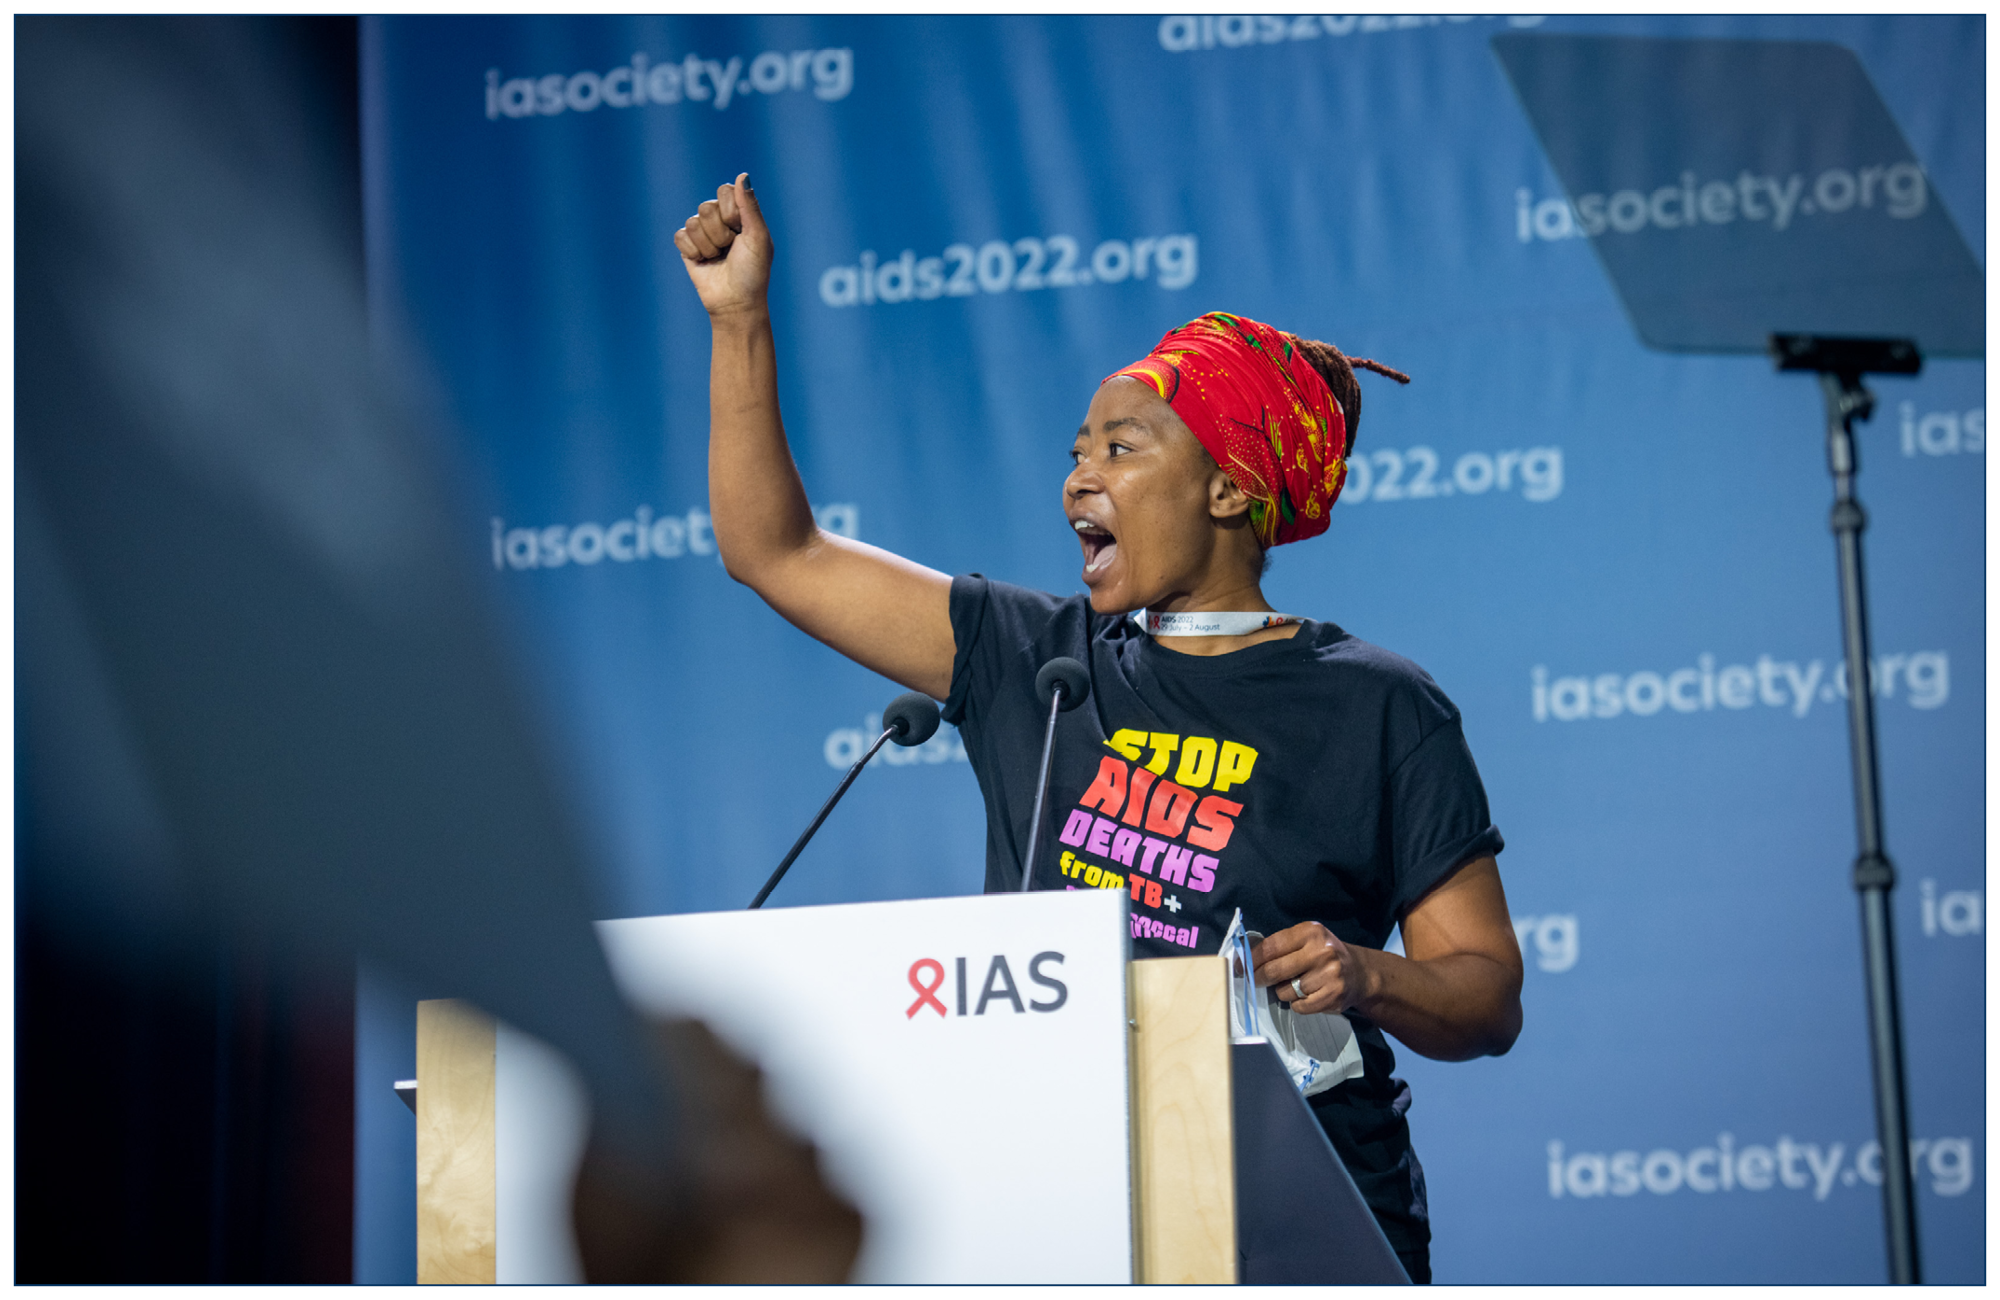 South African activist Vuyiseka Dubula protesting lack of action on tuberculosis and cryptococcal meningitis at AIDS 2022. Photo©Steve Forrest/Workers’ Photos/IAS.